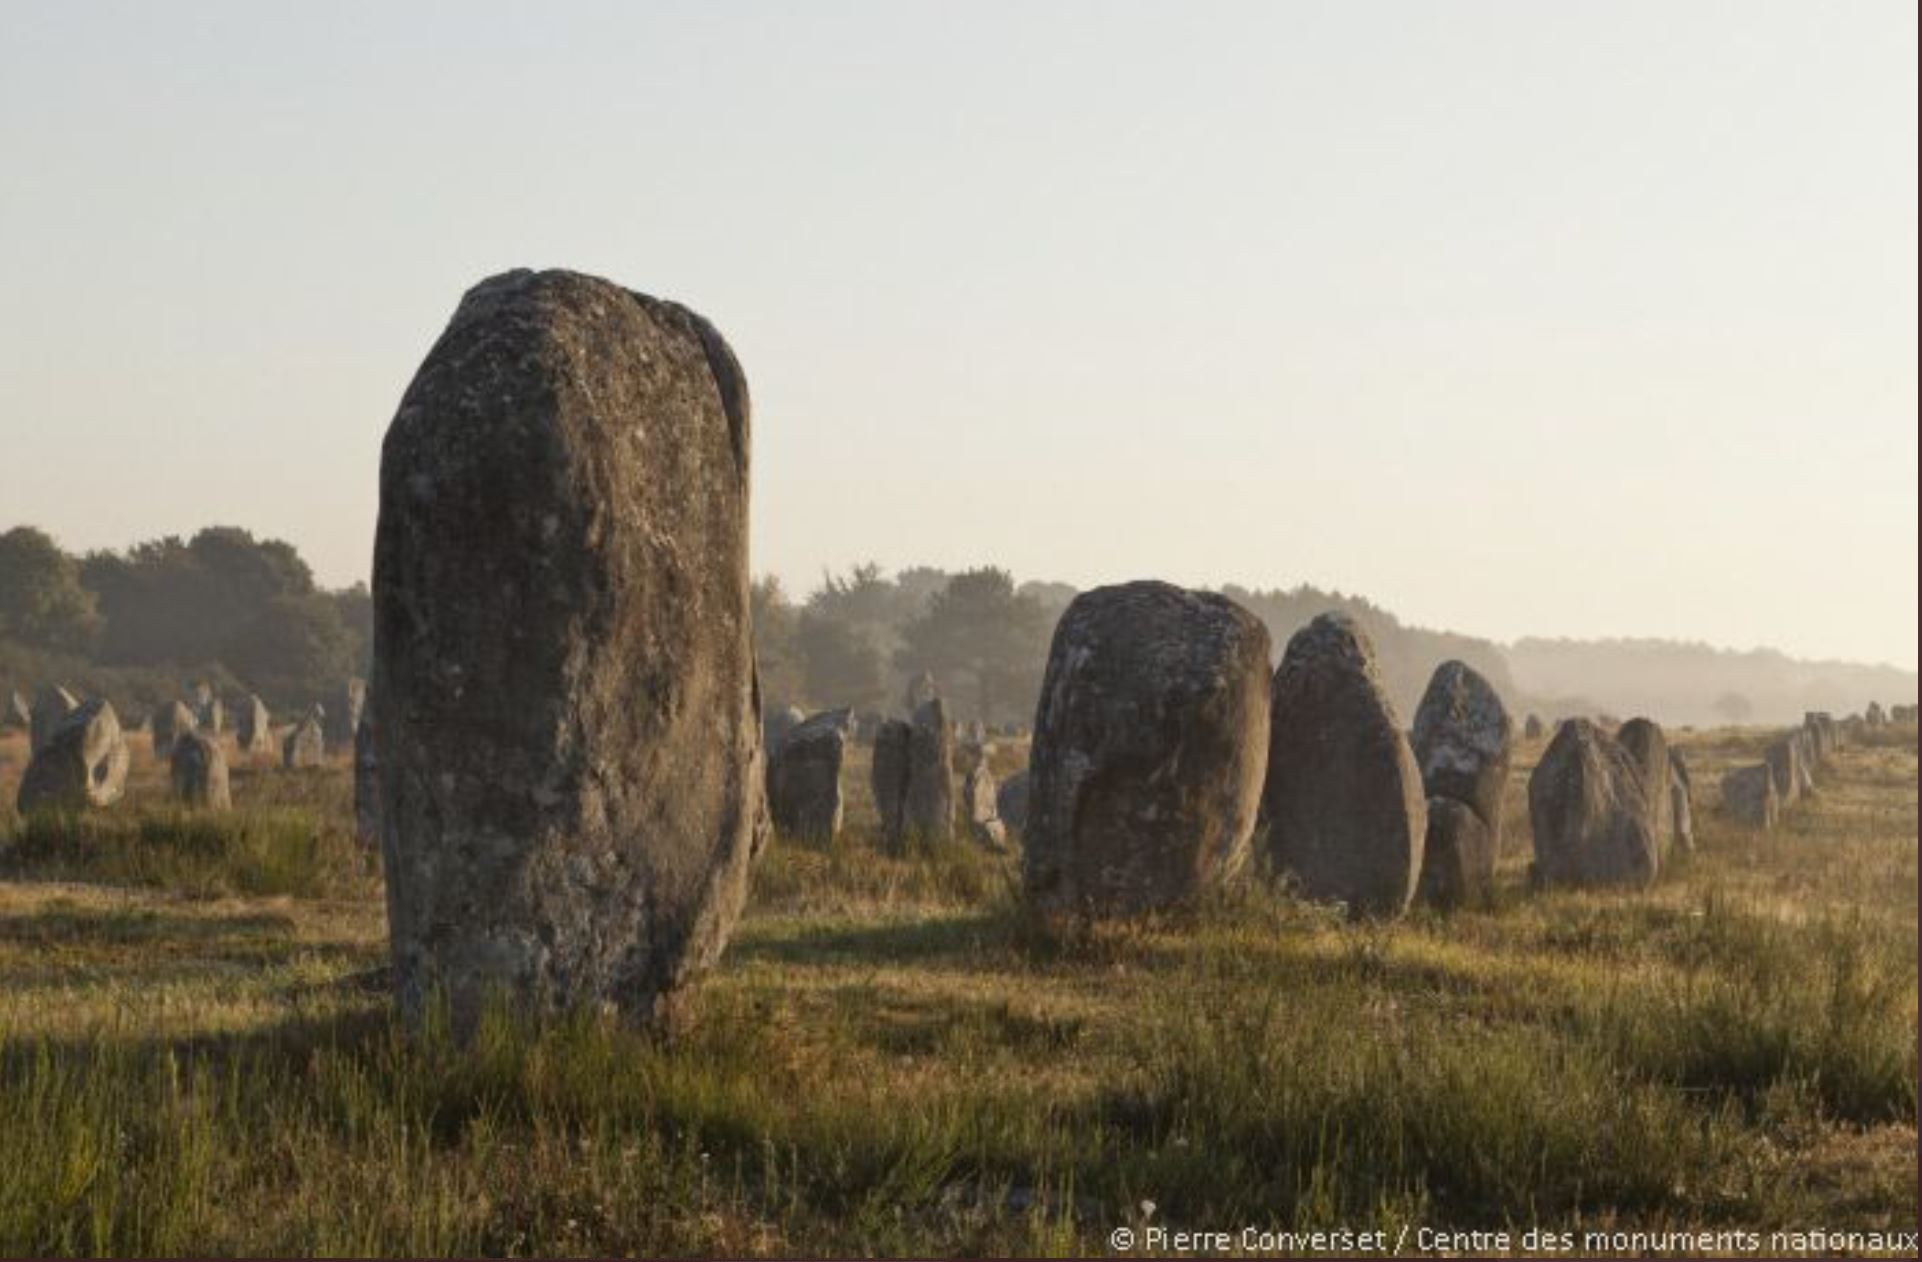 The mysterious stones of Carnac